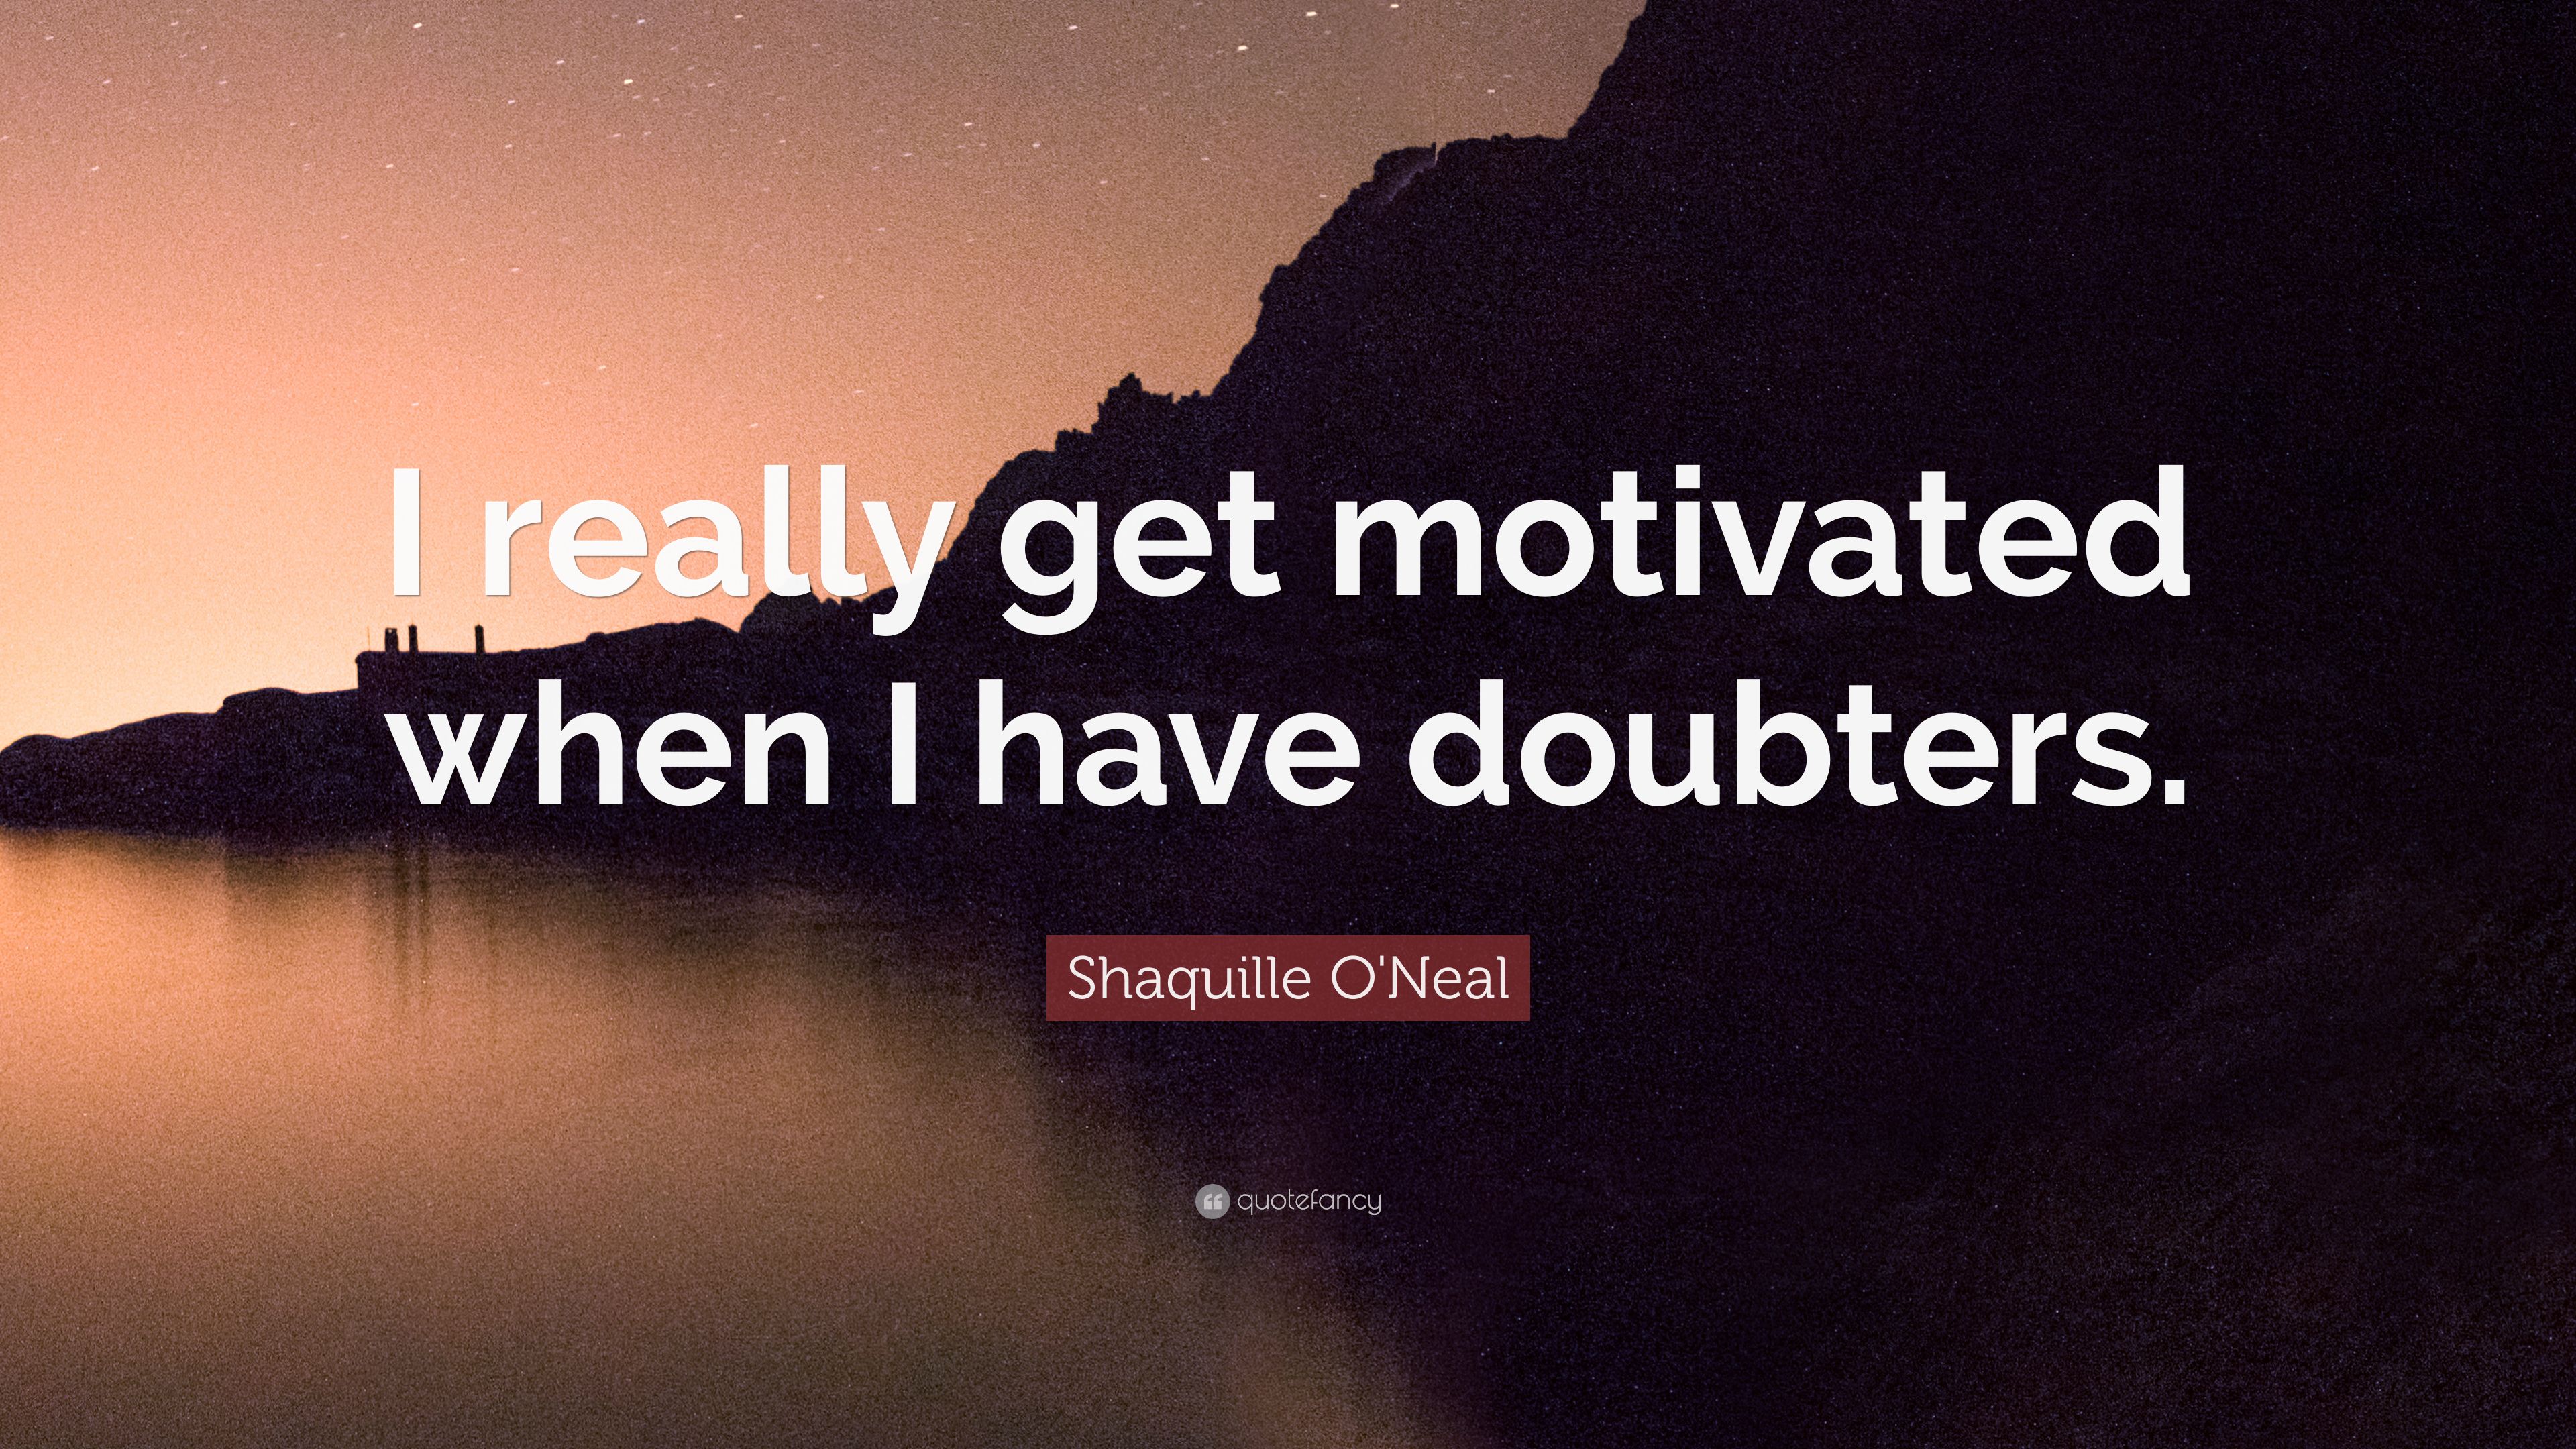 Shaquille O'Neal Quote: “I really get motivated when I have